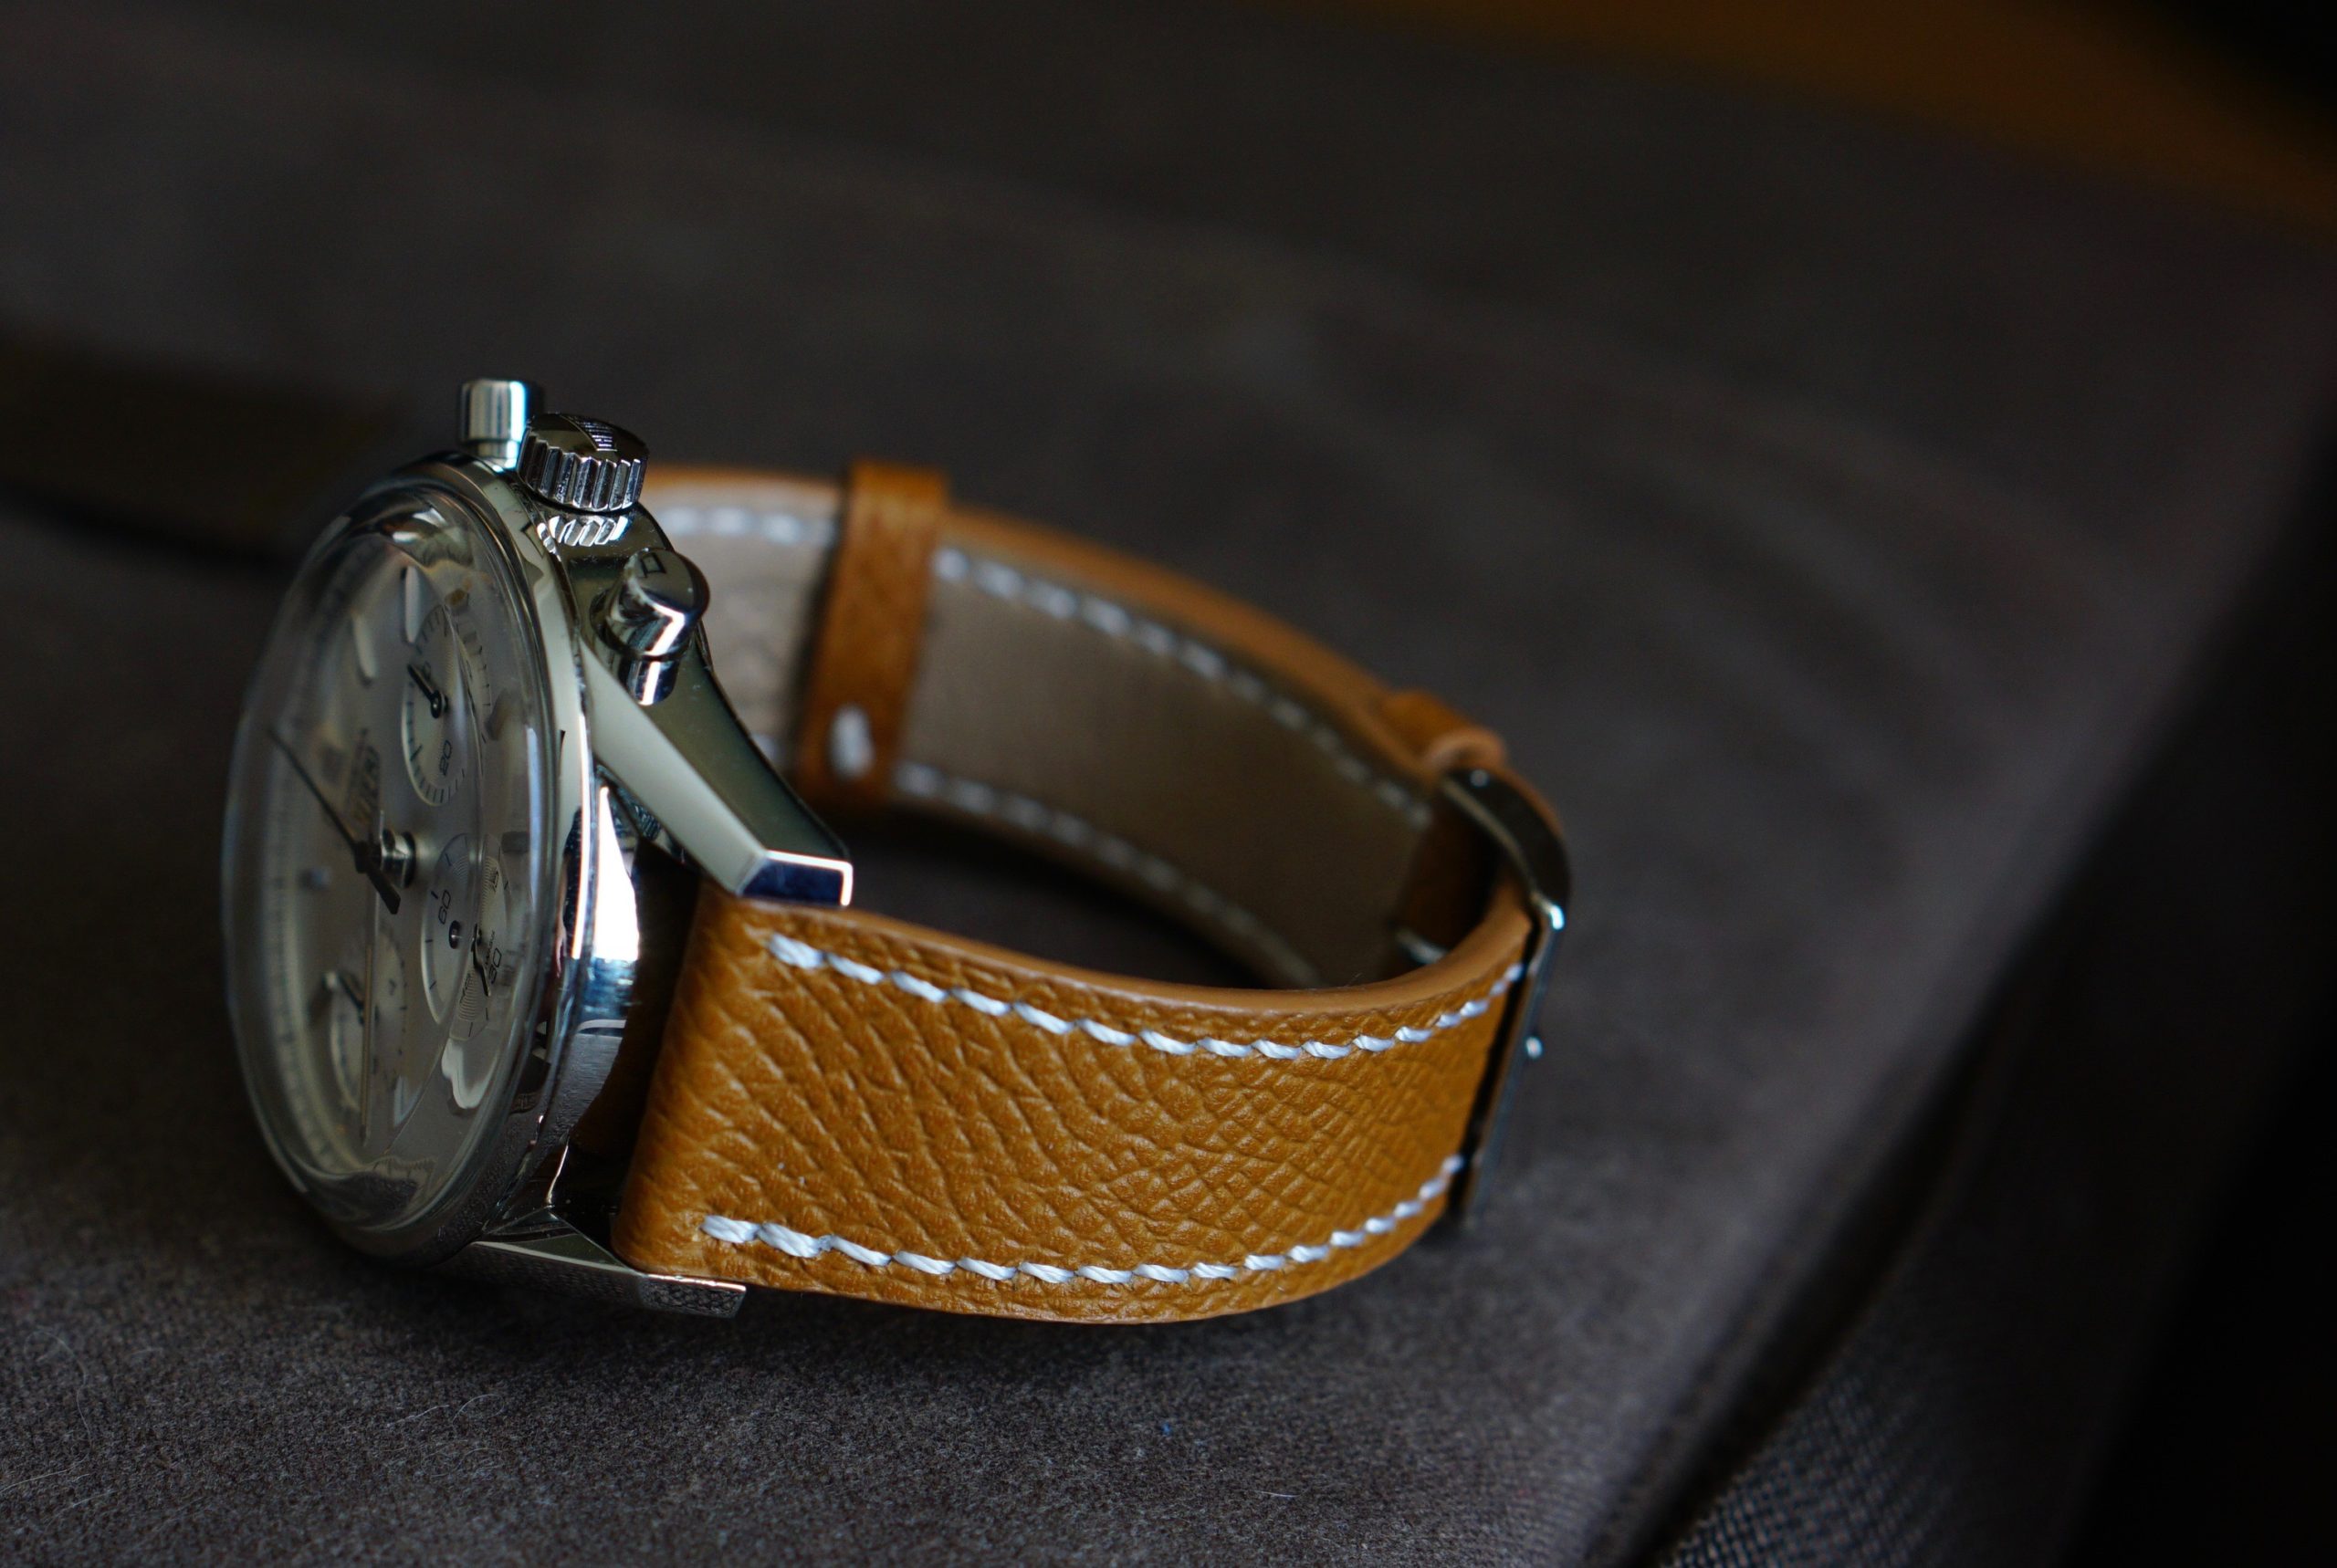 Grey French Barenia Leather Quick Release Watch Band